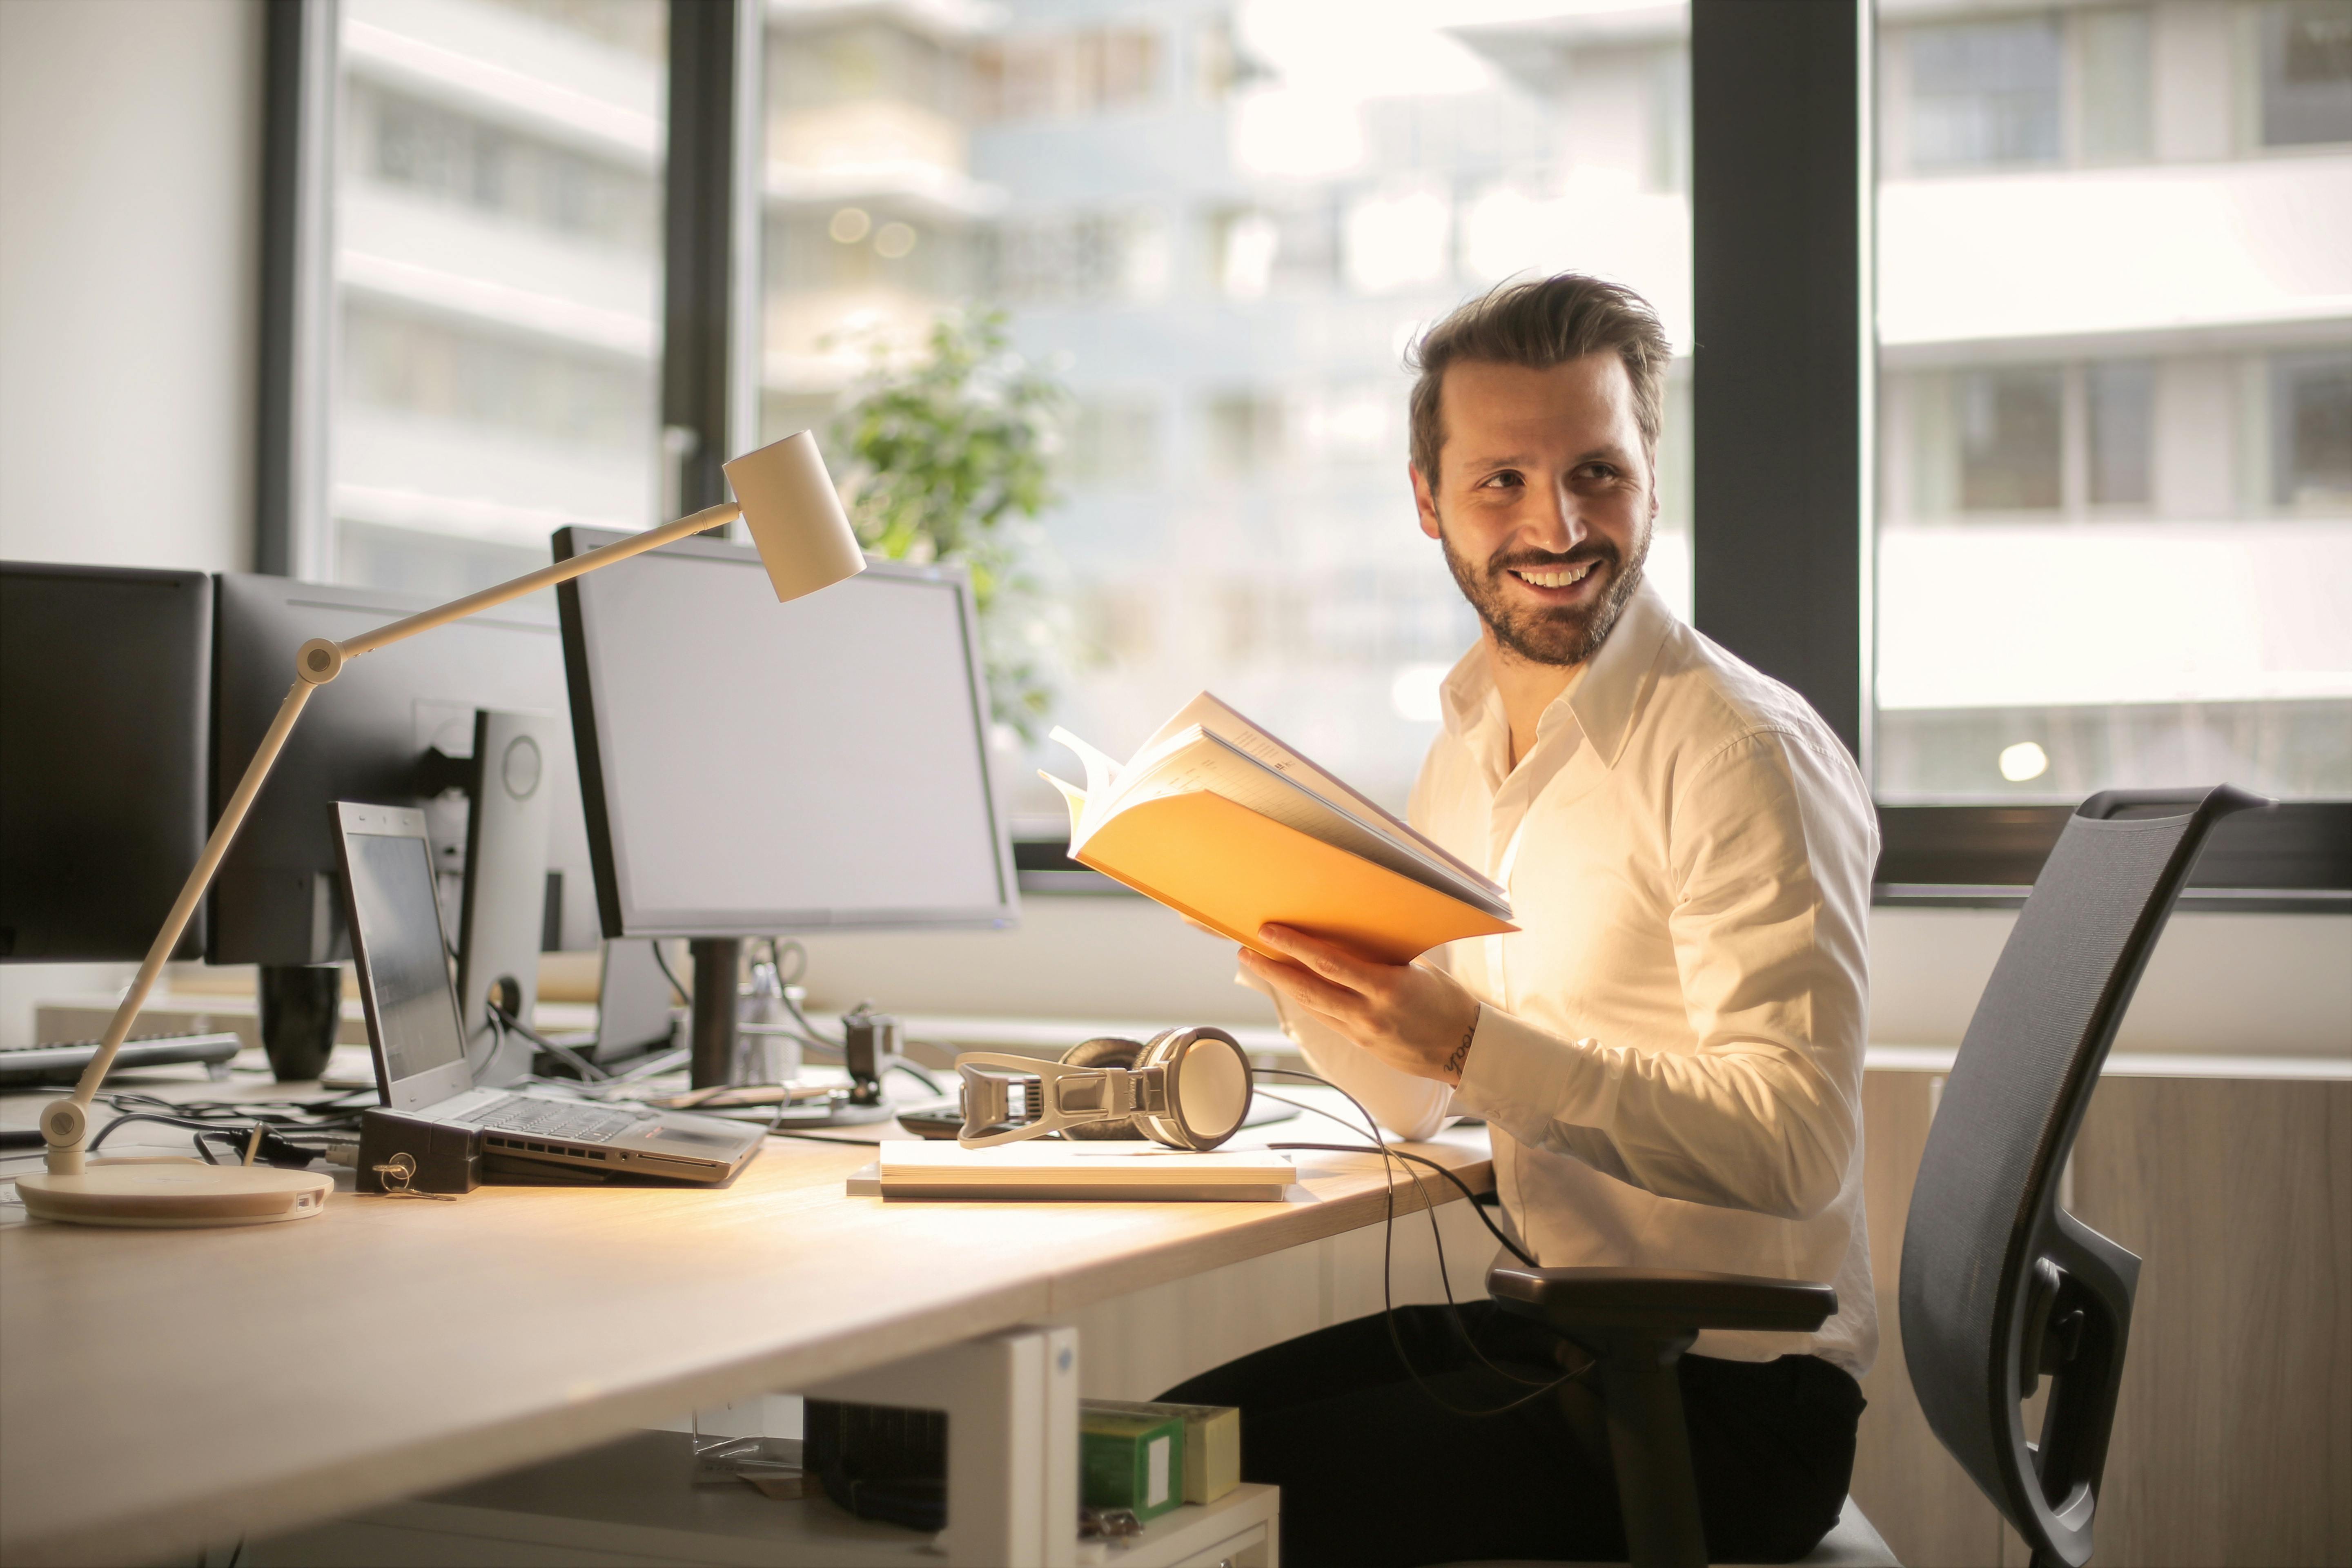 A happy man smiling while working | Source: Pexels